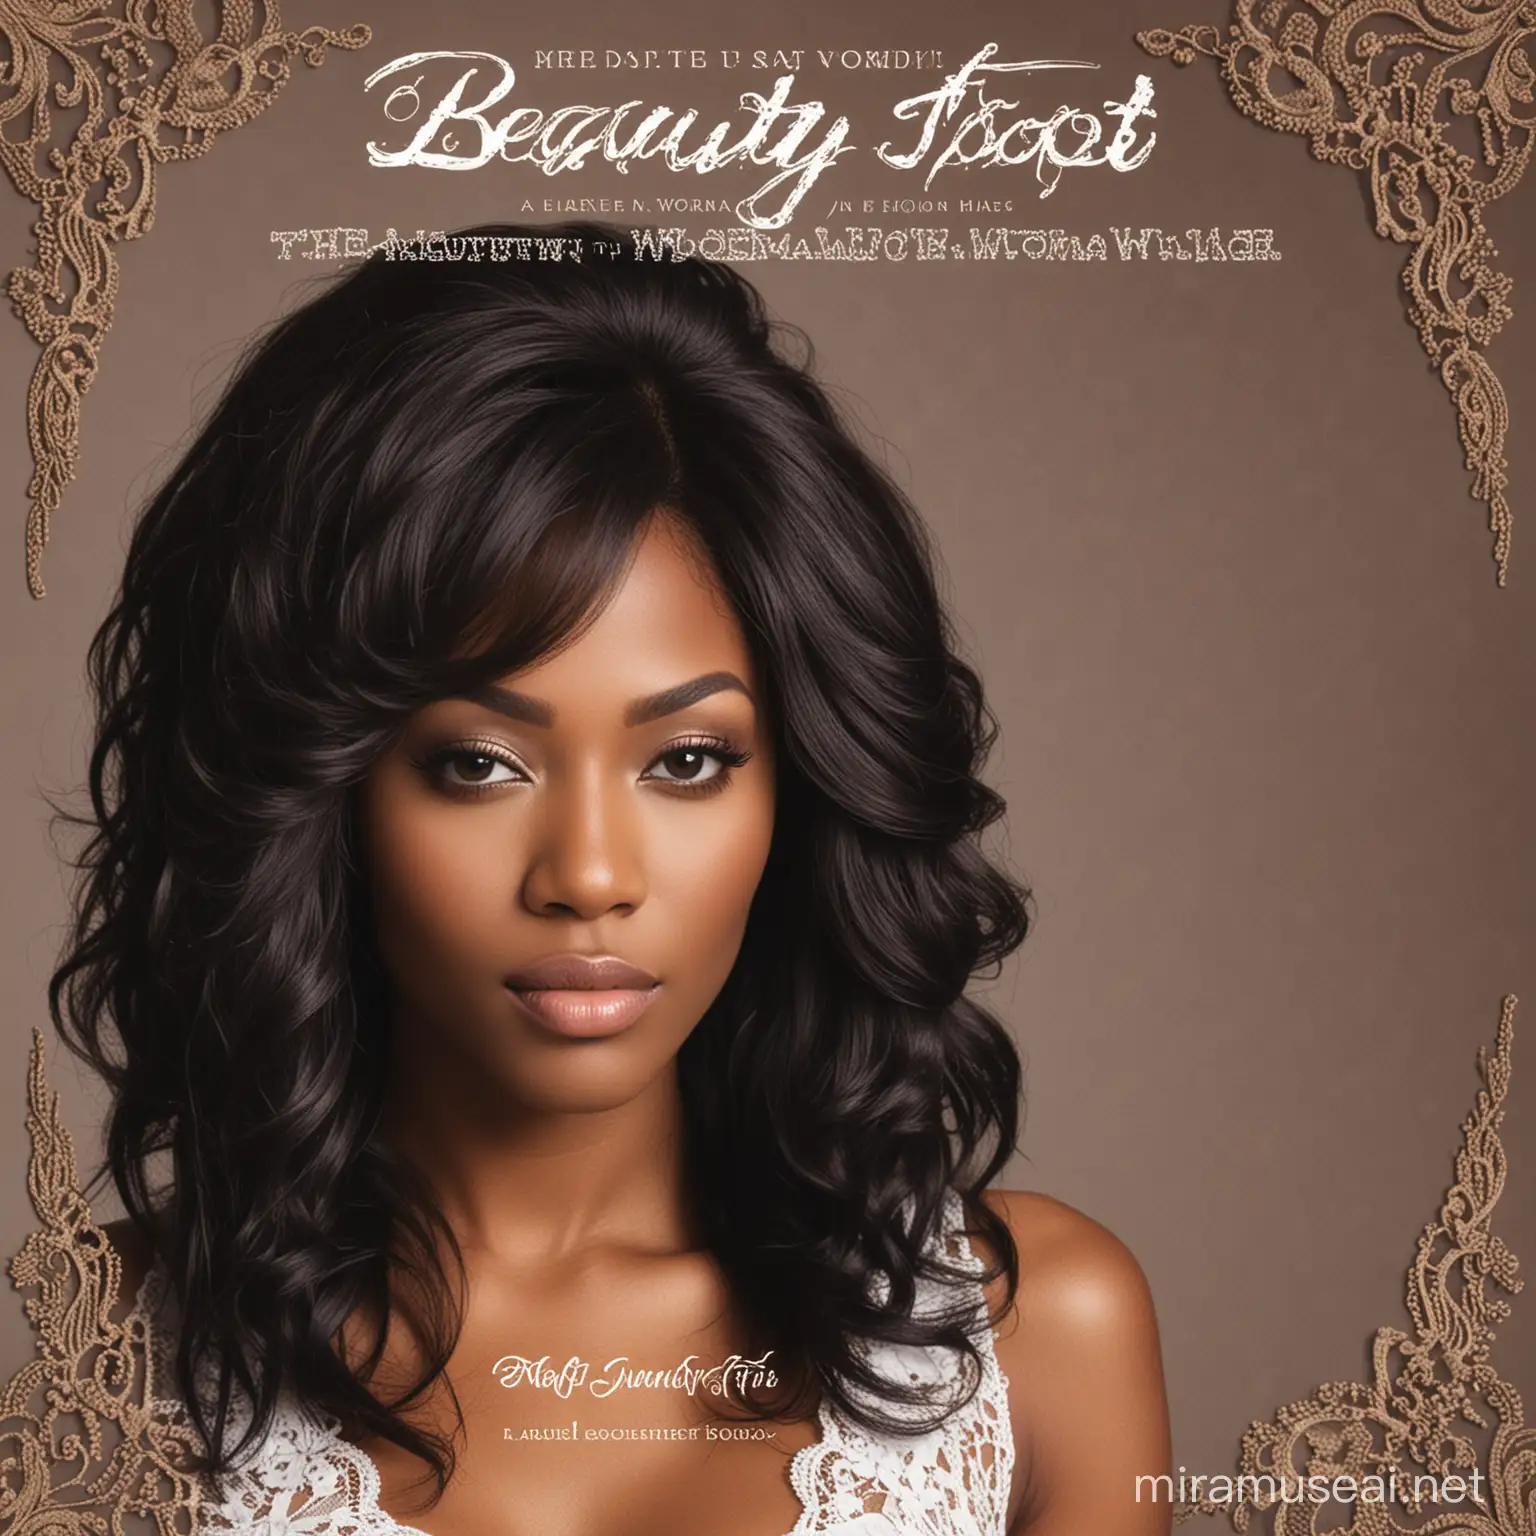 Create a album cover with name on the album cover “The Beauty Spot” with a modern Eboni woman with a long lace front wig on 